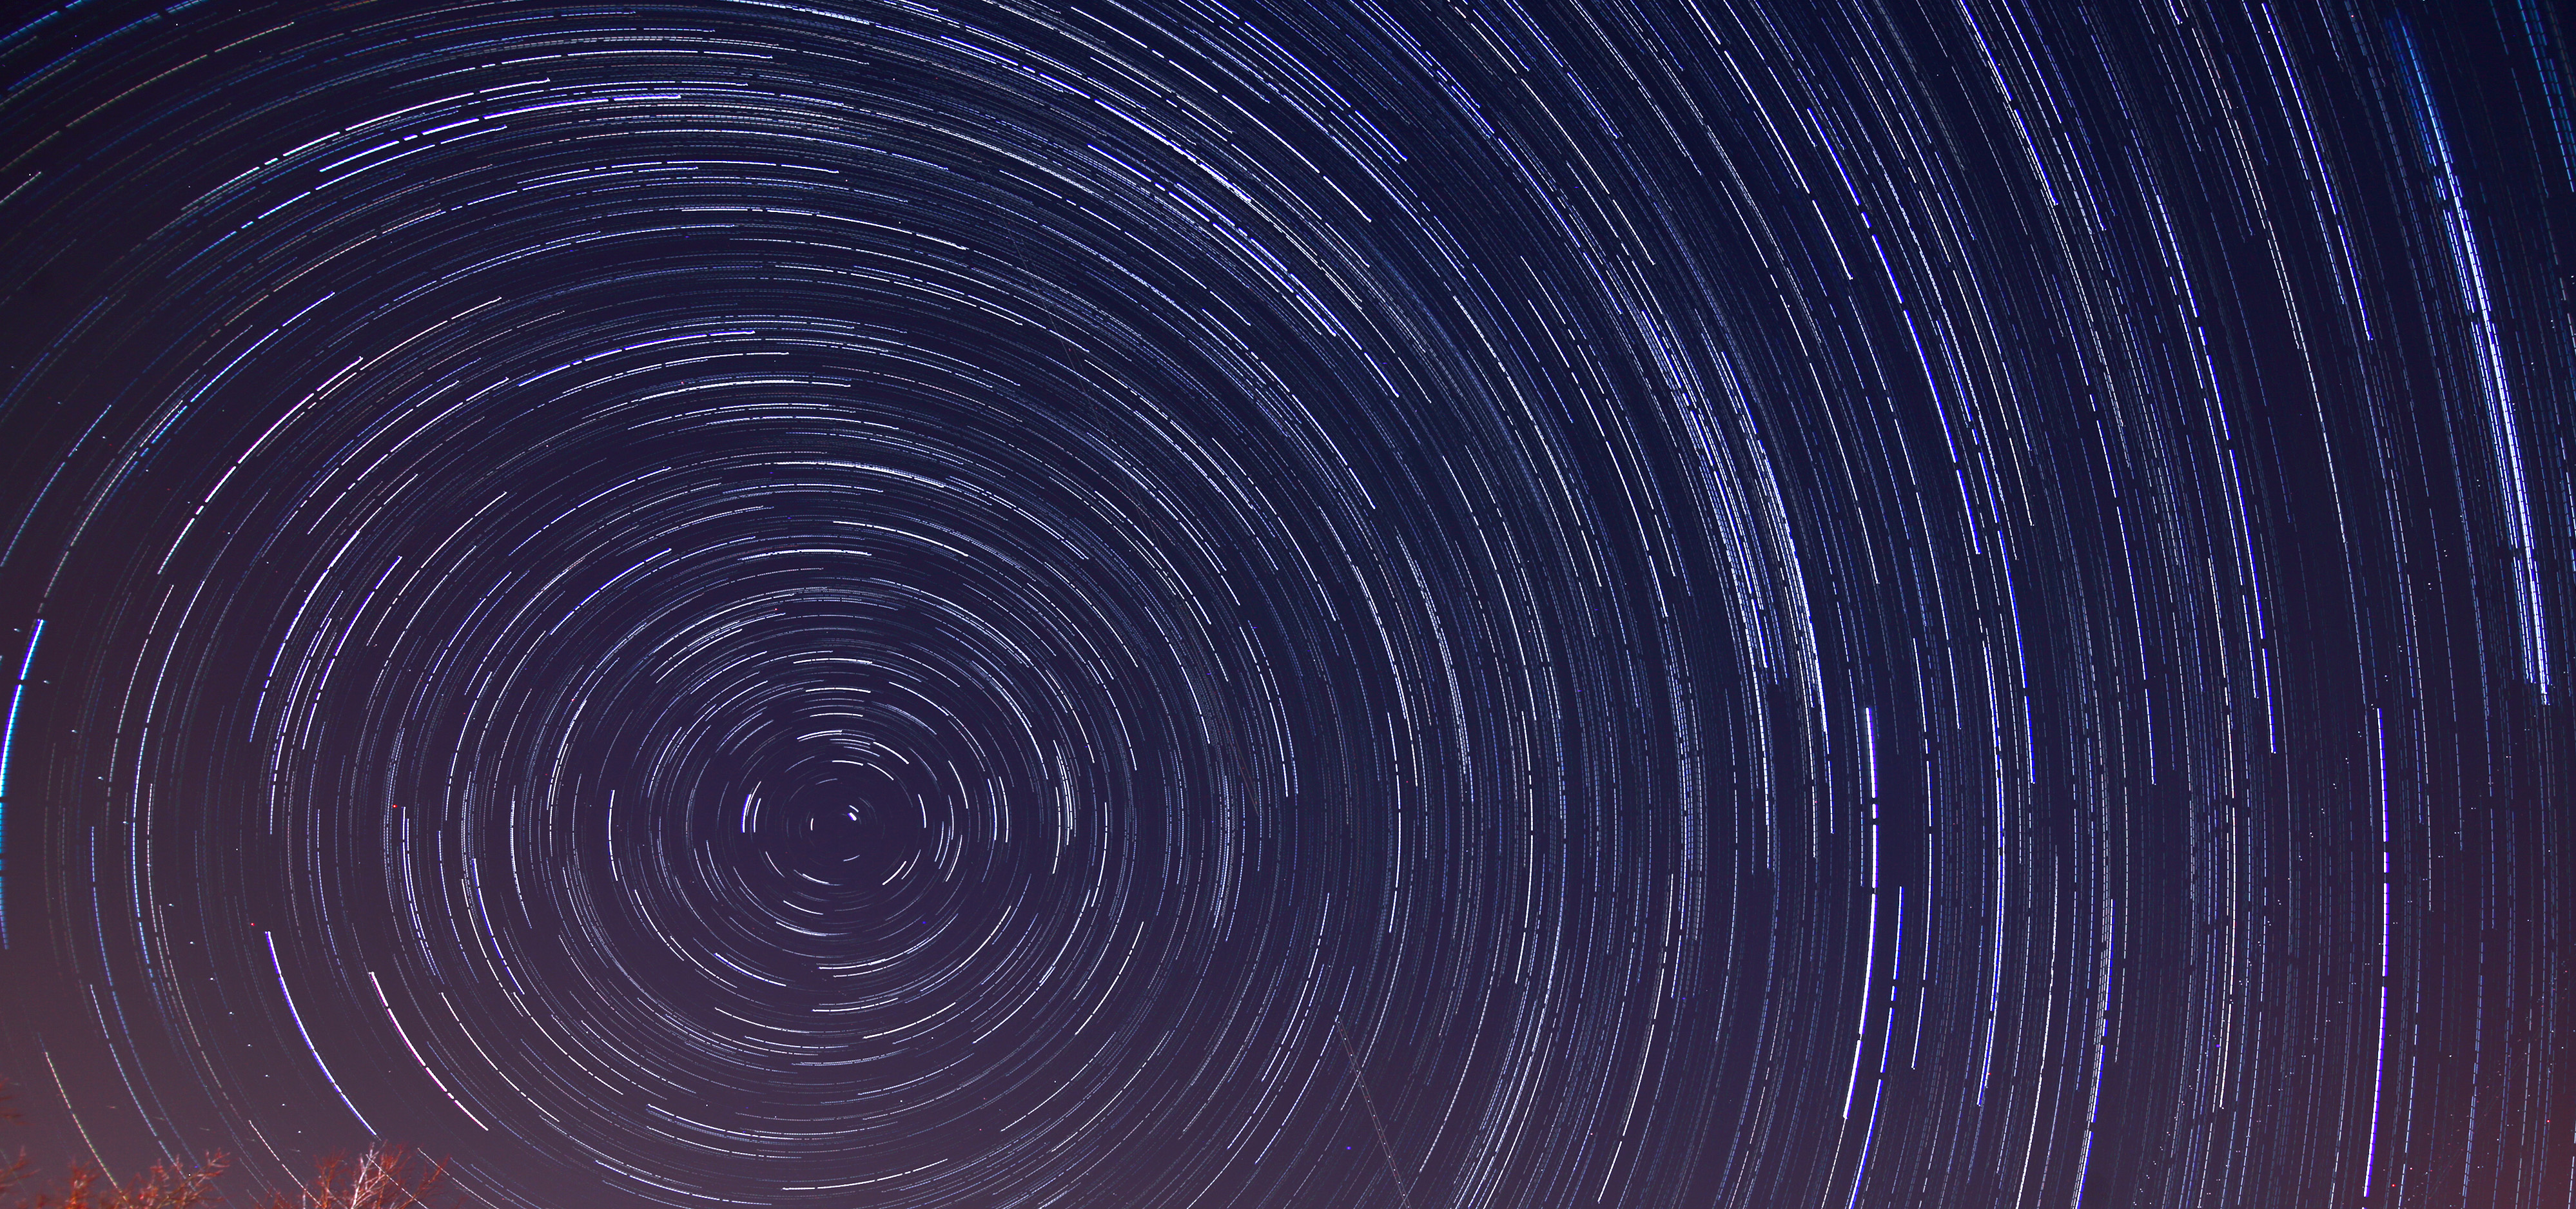 Star trail баннеры. Spin фон. Spinning background. Star Trails Wallpaper. Car Spinning in the Sky.